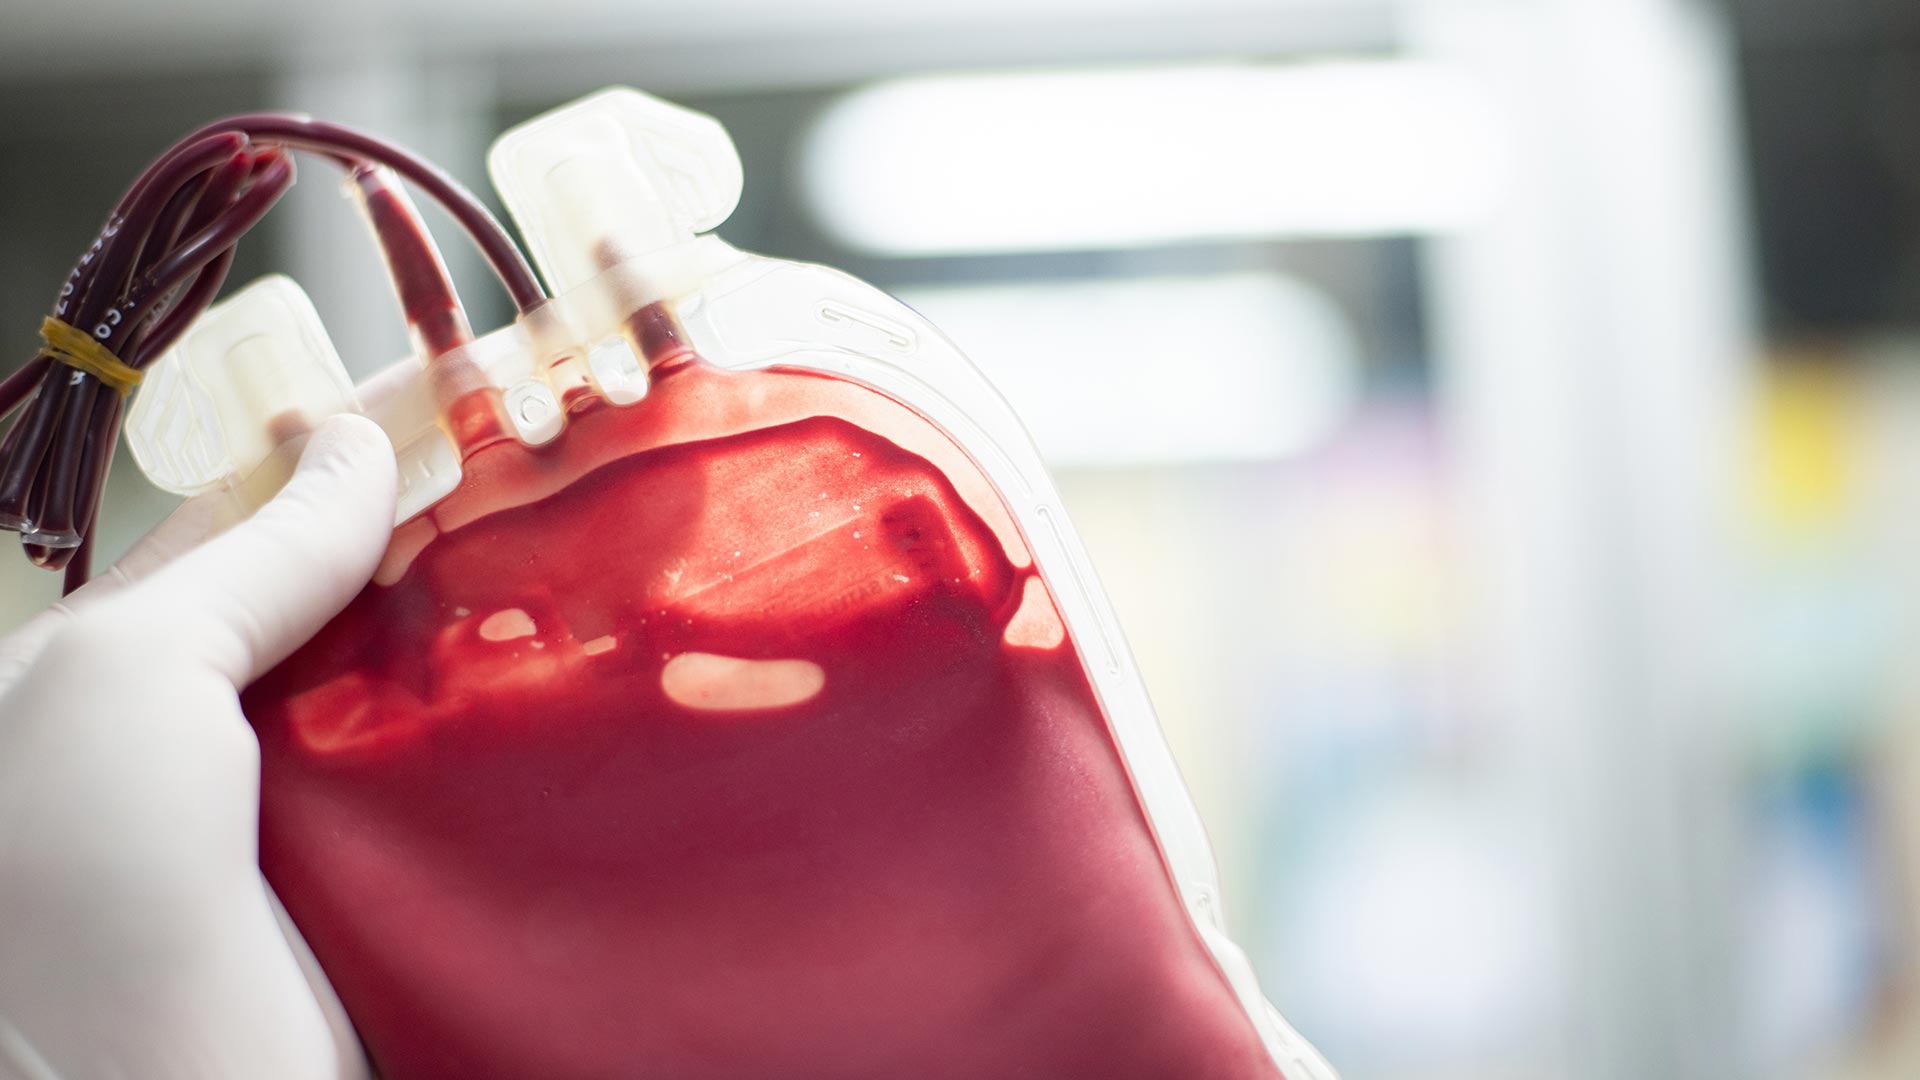  bag of fresh blood that has been donated